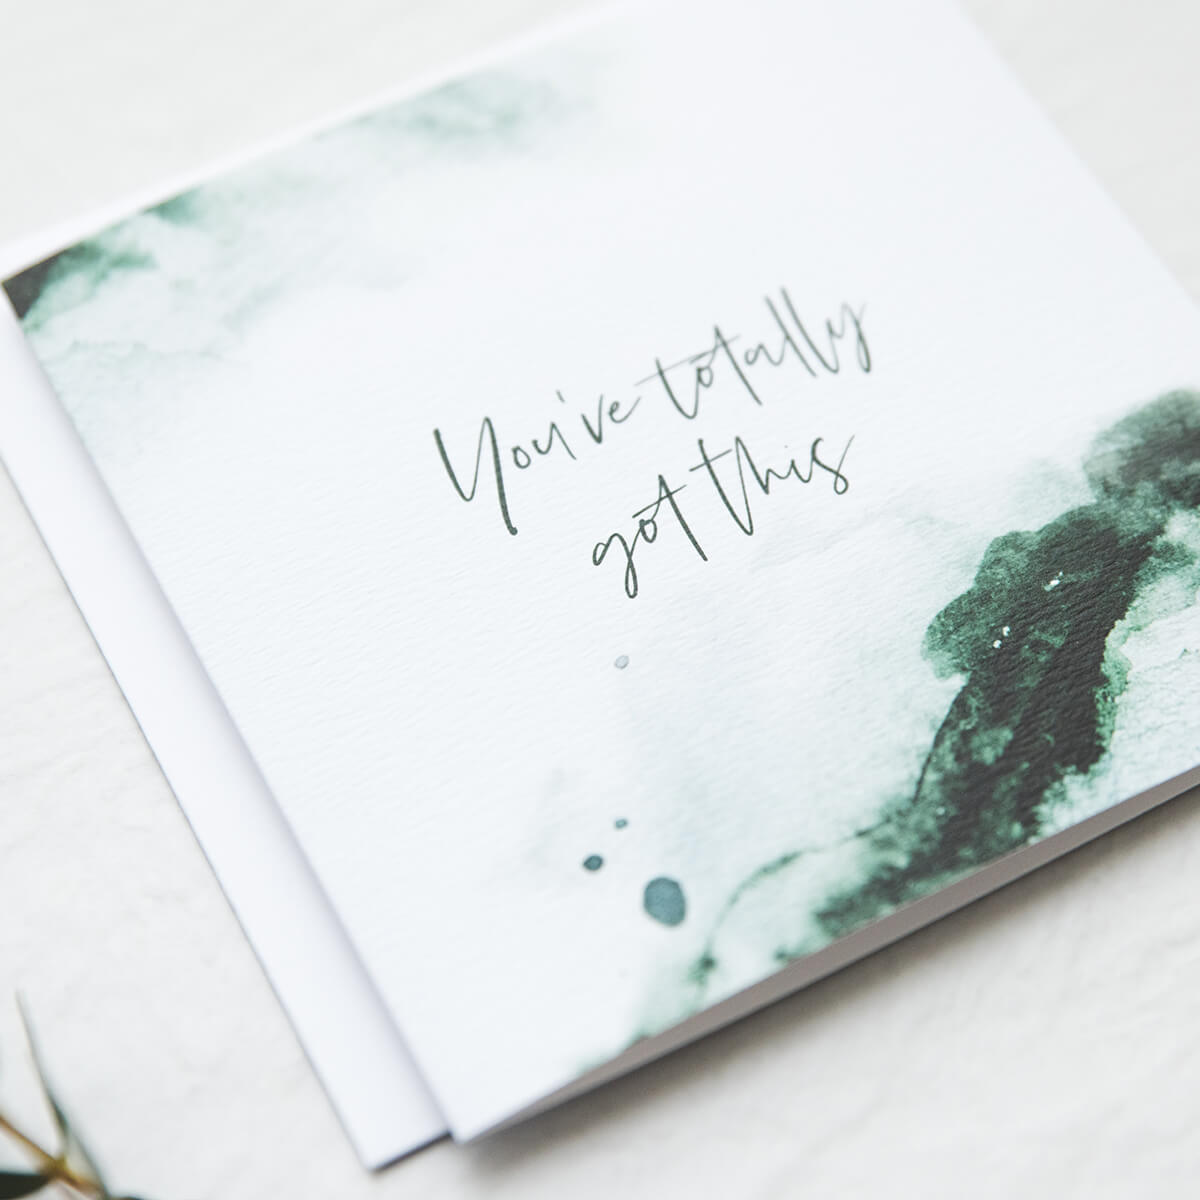 &#39;You’ve Totally Got This&#39; Good Luck Card - I am Nat Ltd - Greeting Card